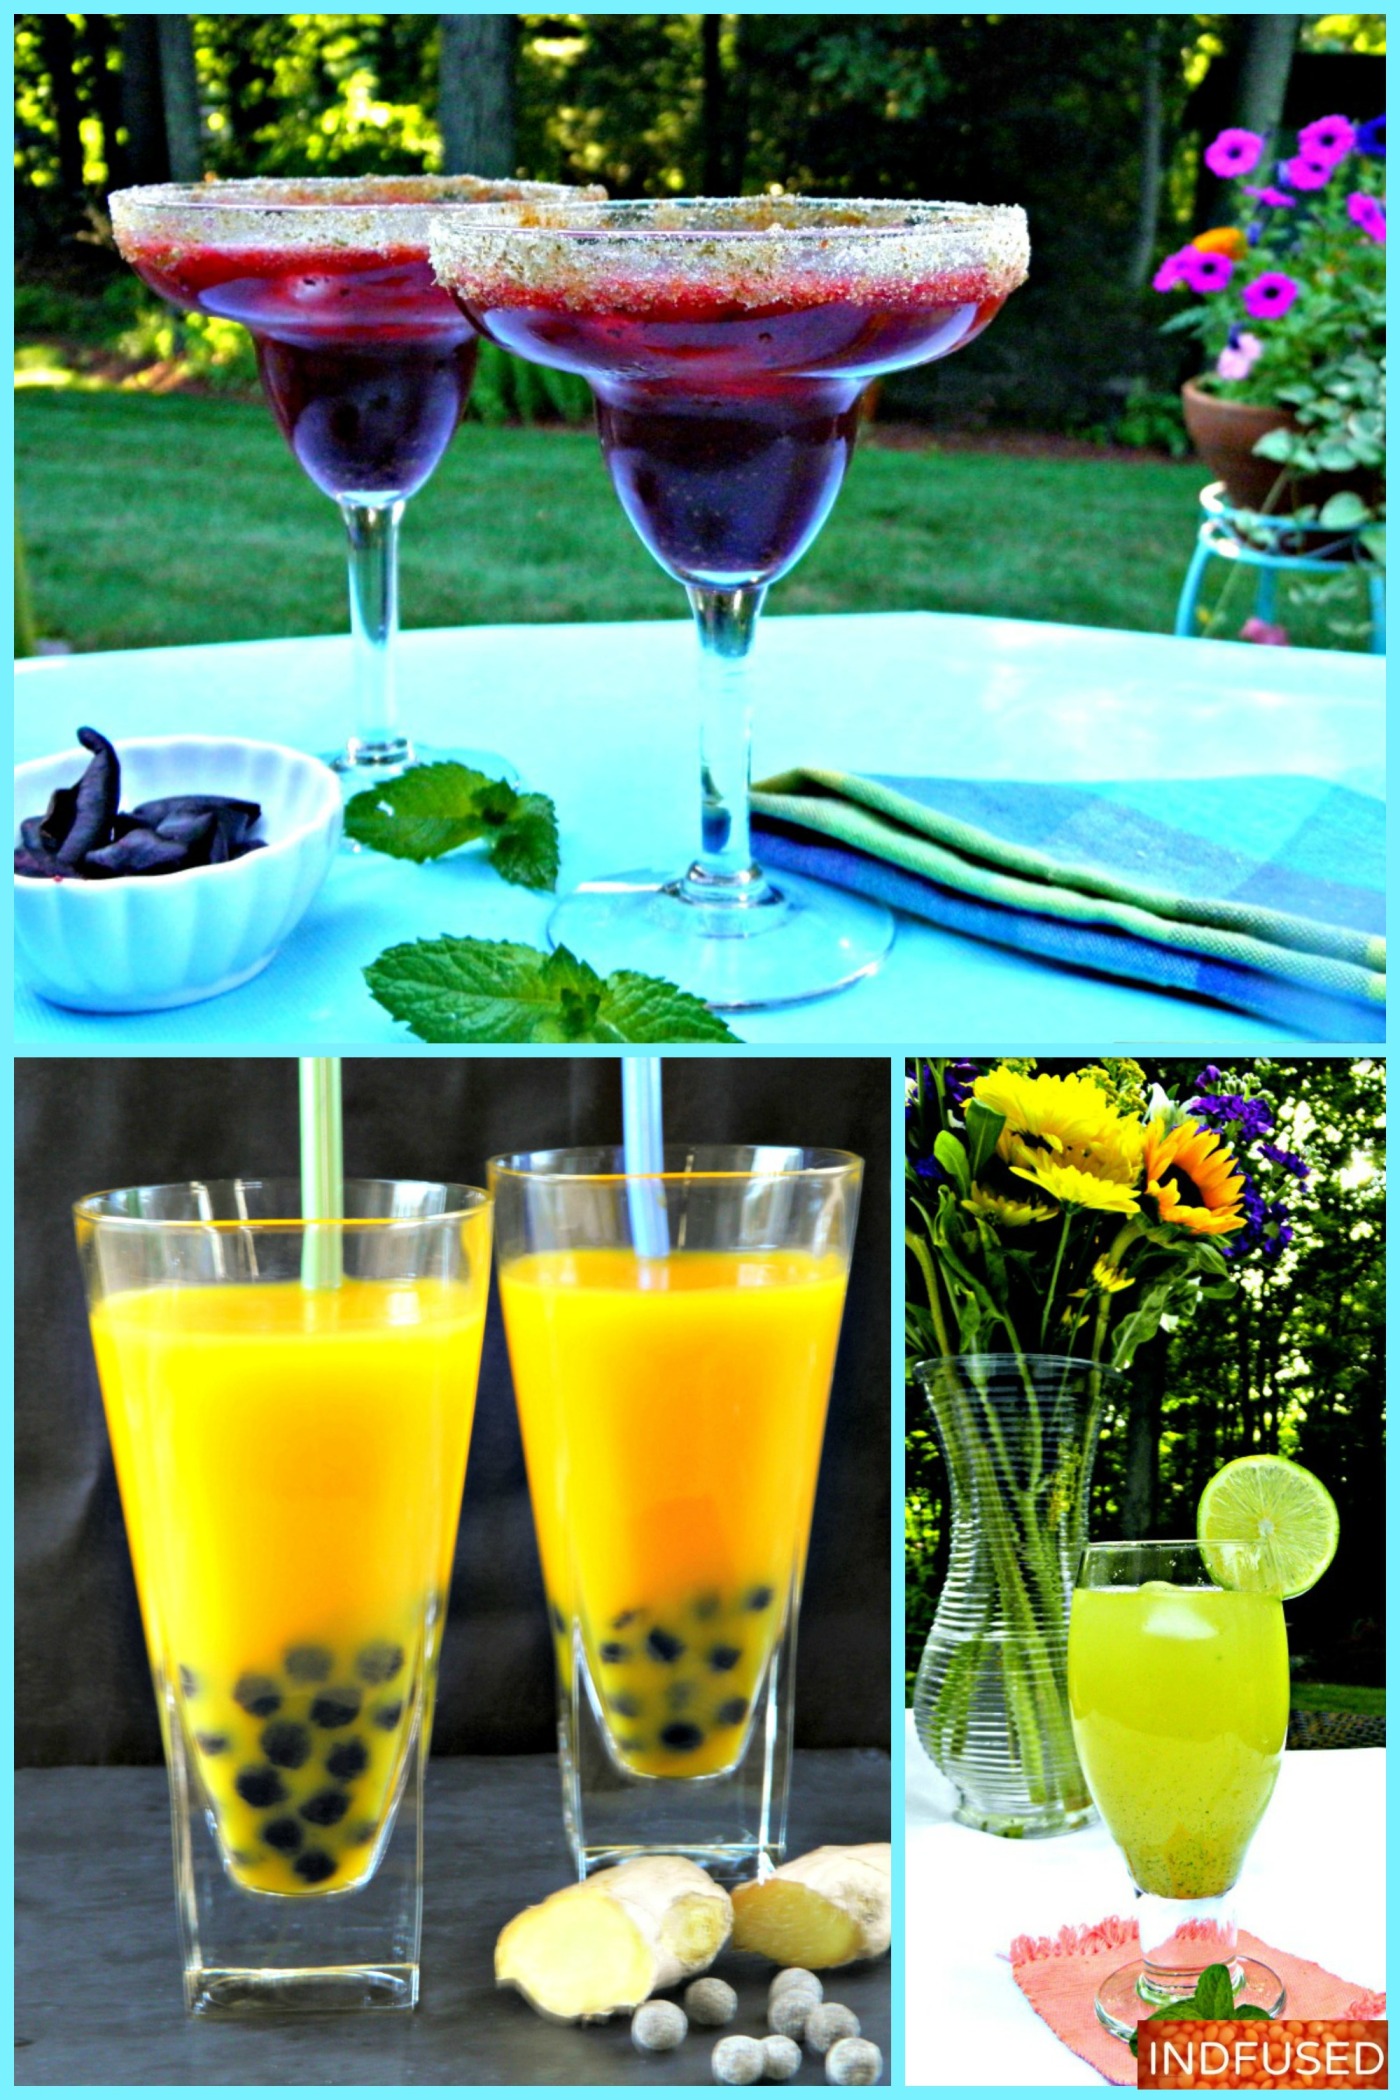 Top 3 mocktails- recipes you will need for memorable summer parties. Mocktails with health benefits!